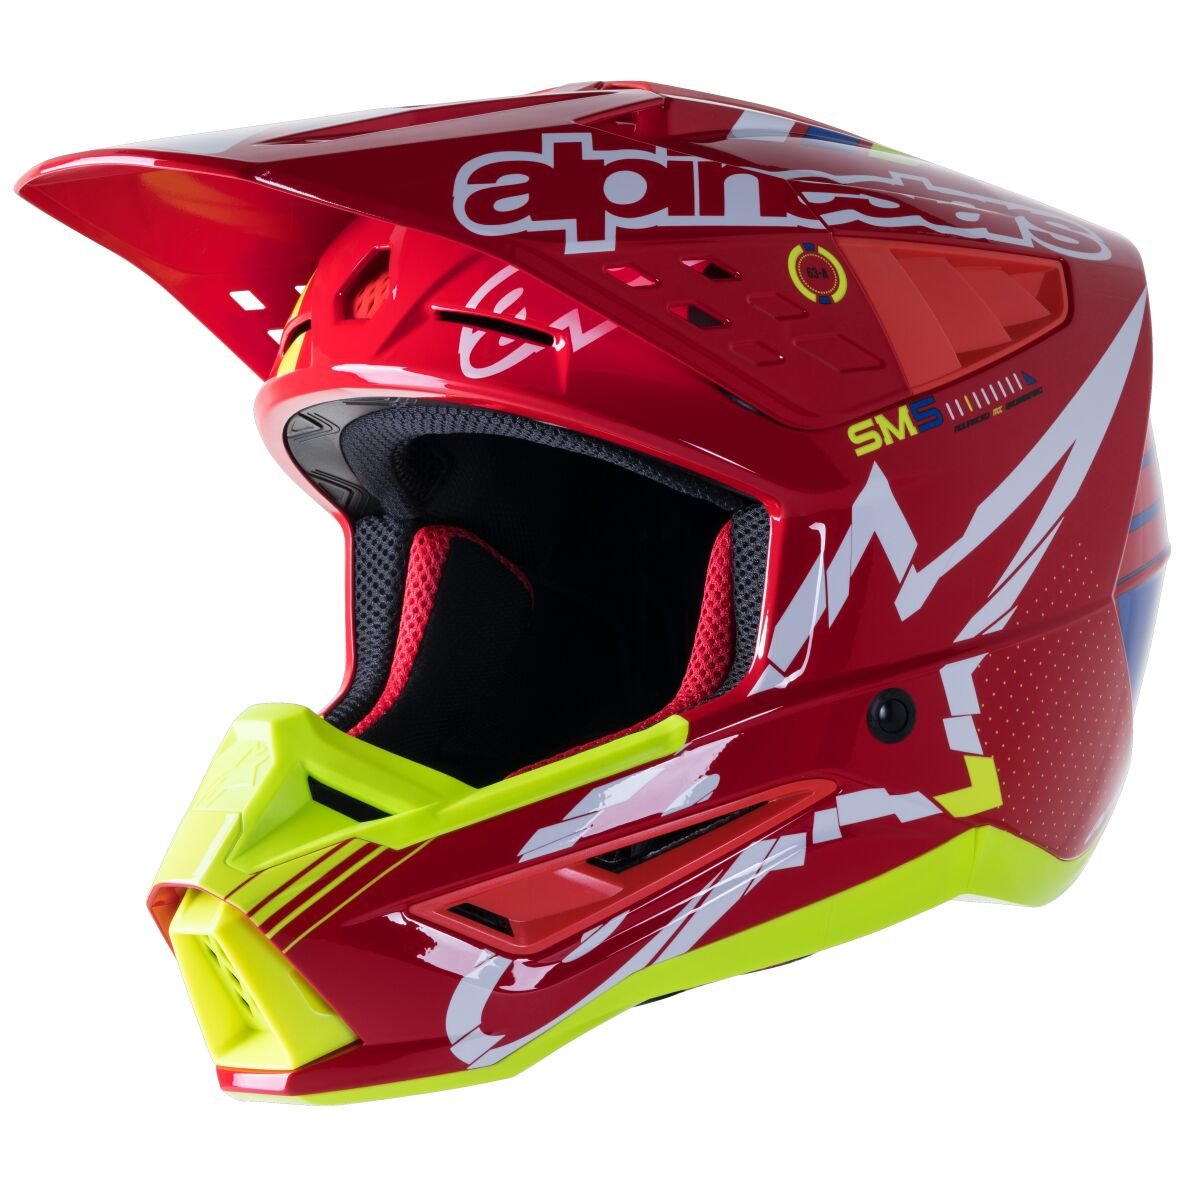 Helm Sm 5 Act Rd-Yl Gl